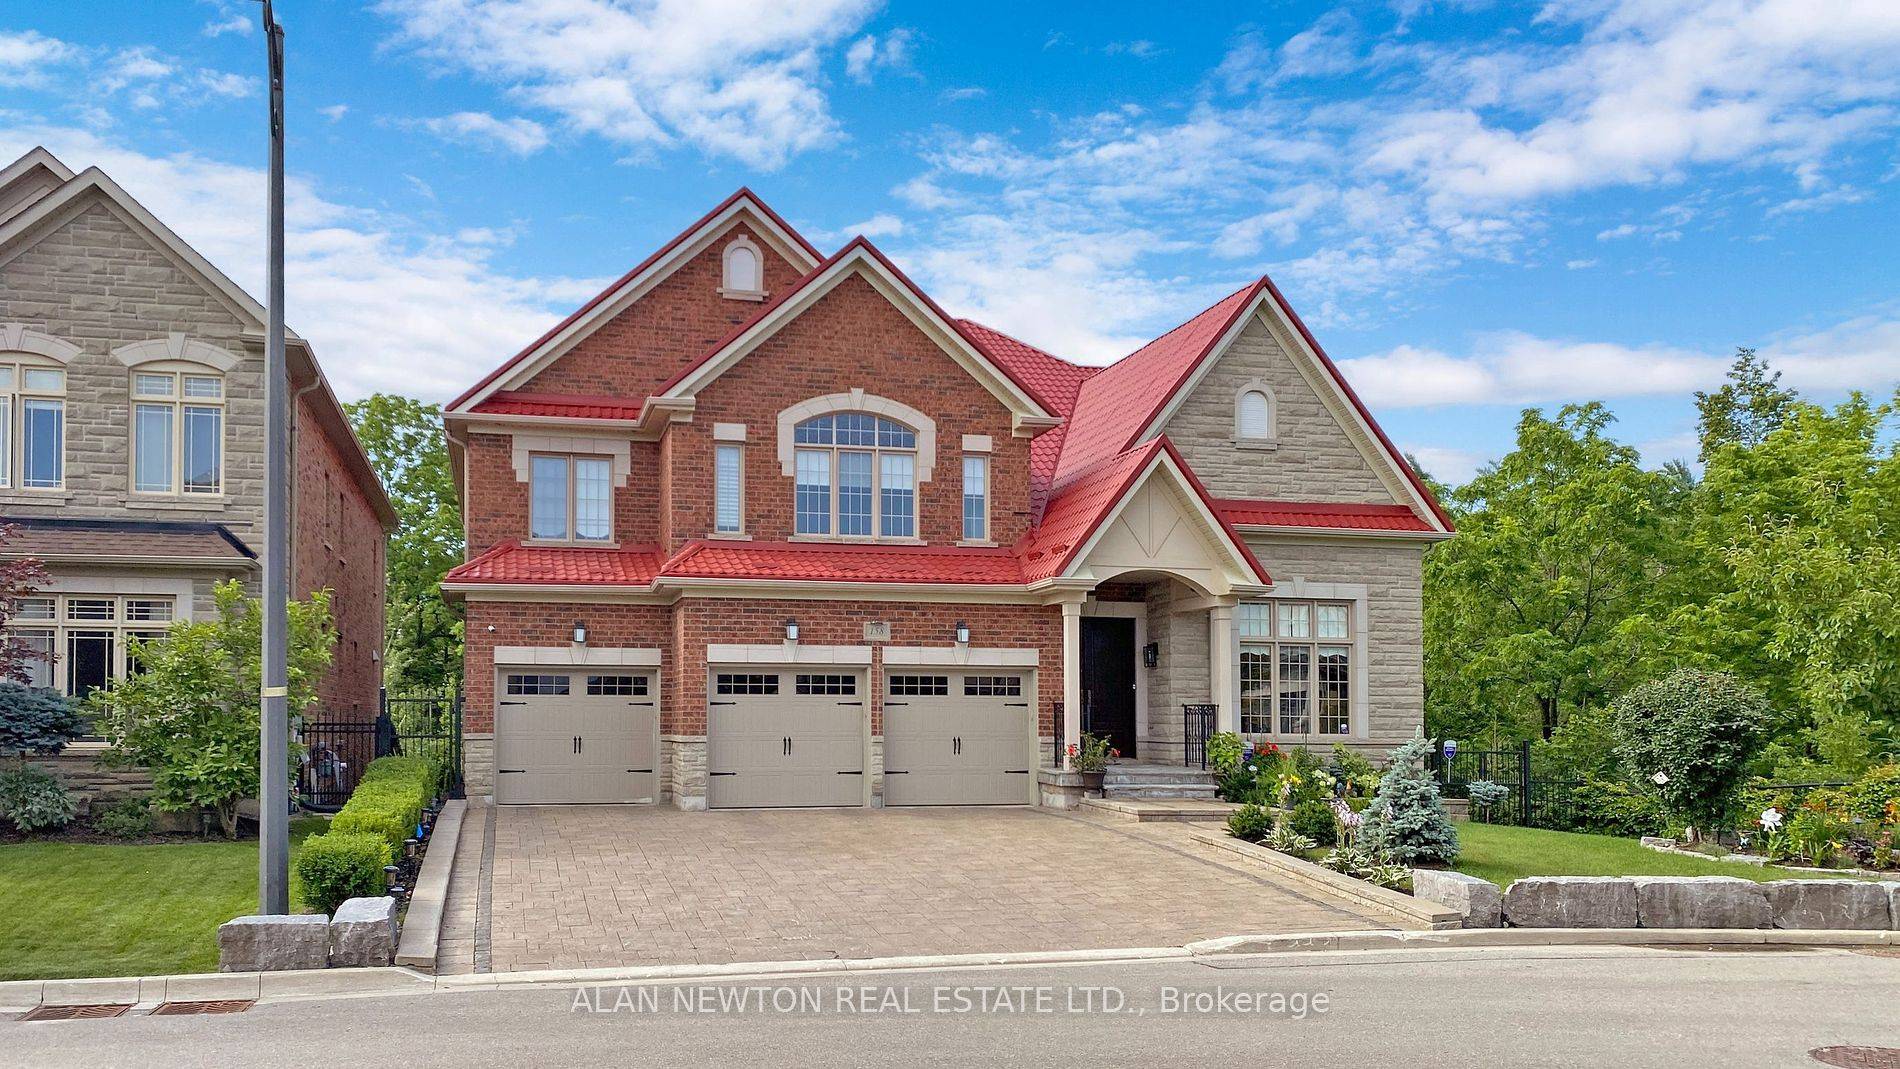 Step into your own private oasis with this luxurious 6 1 bed, 5 bath home situated on a premium corner lot, backing onto a serene ravine.